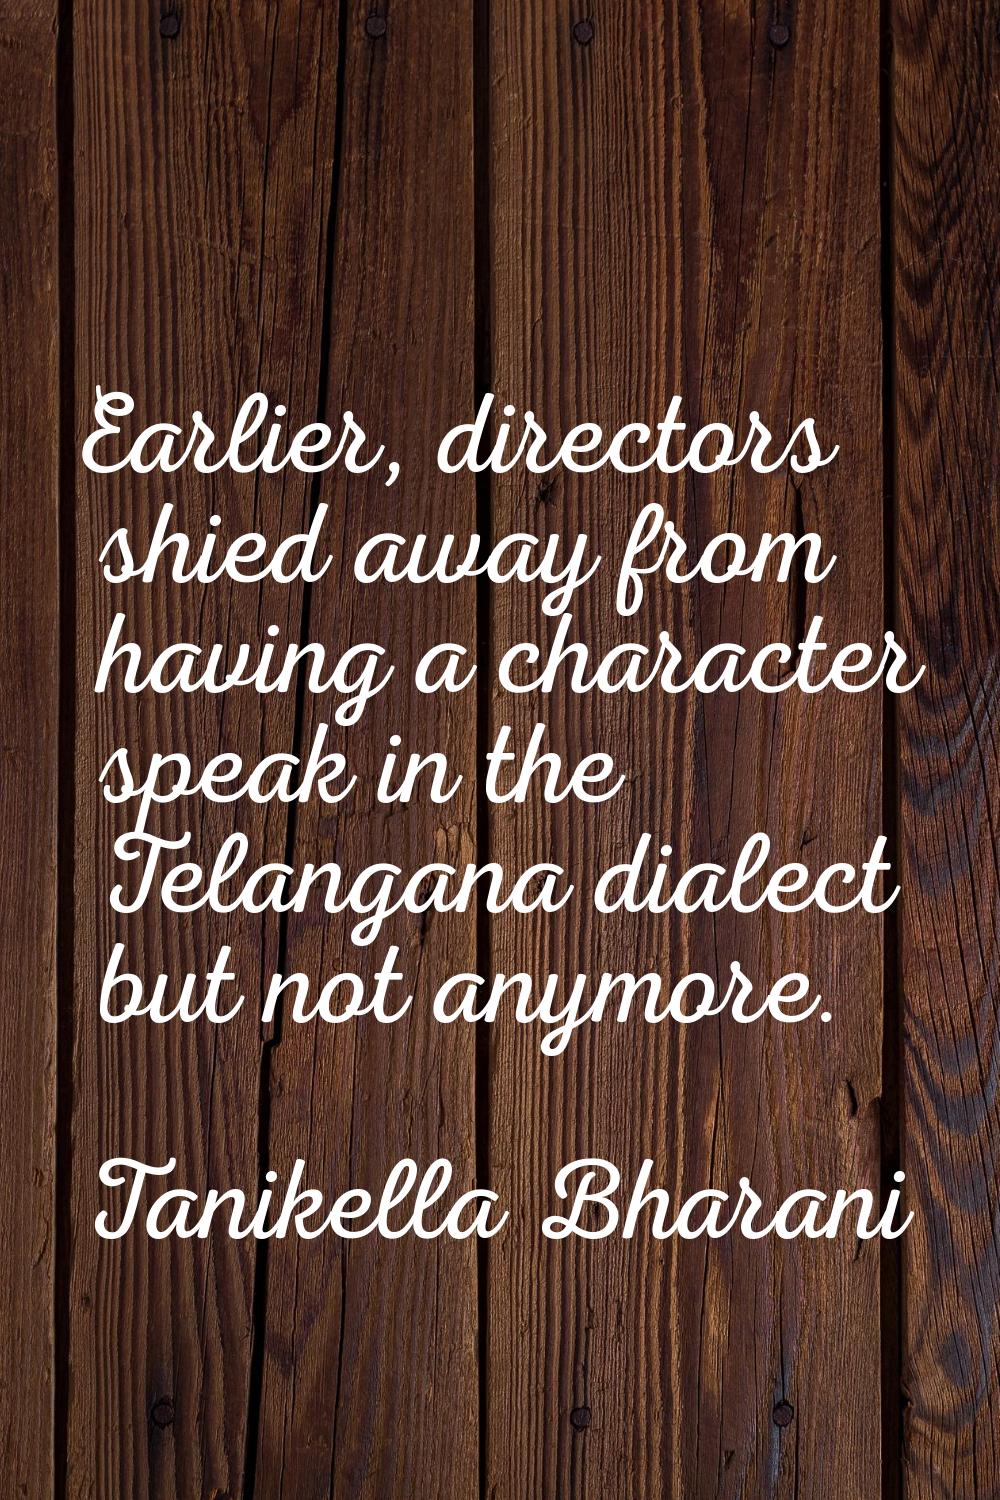 Earlier, directors shied away from having a character speak in the Telangana dialect but not anymor